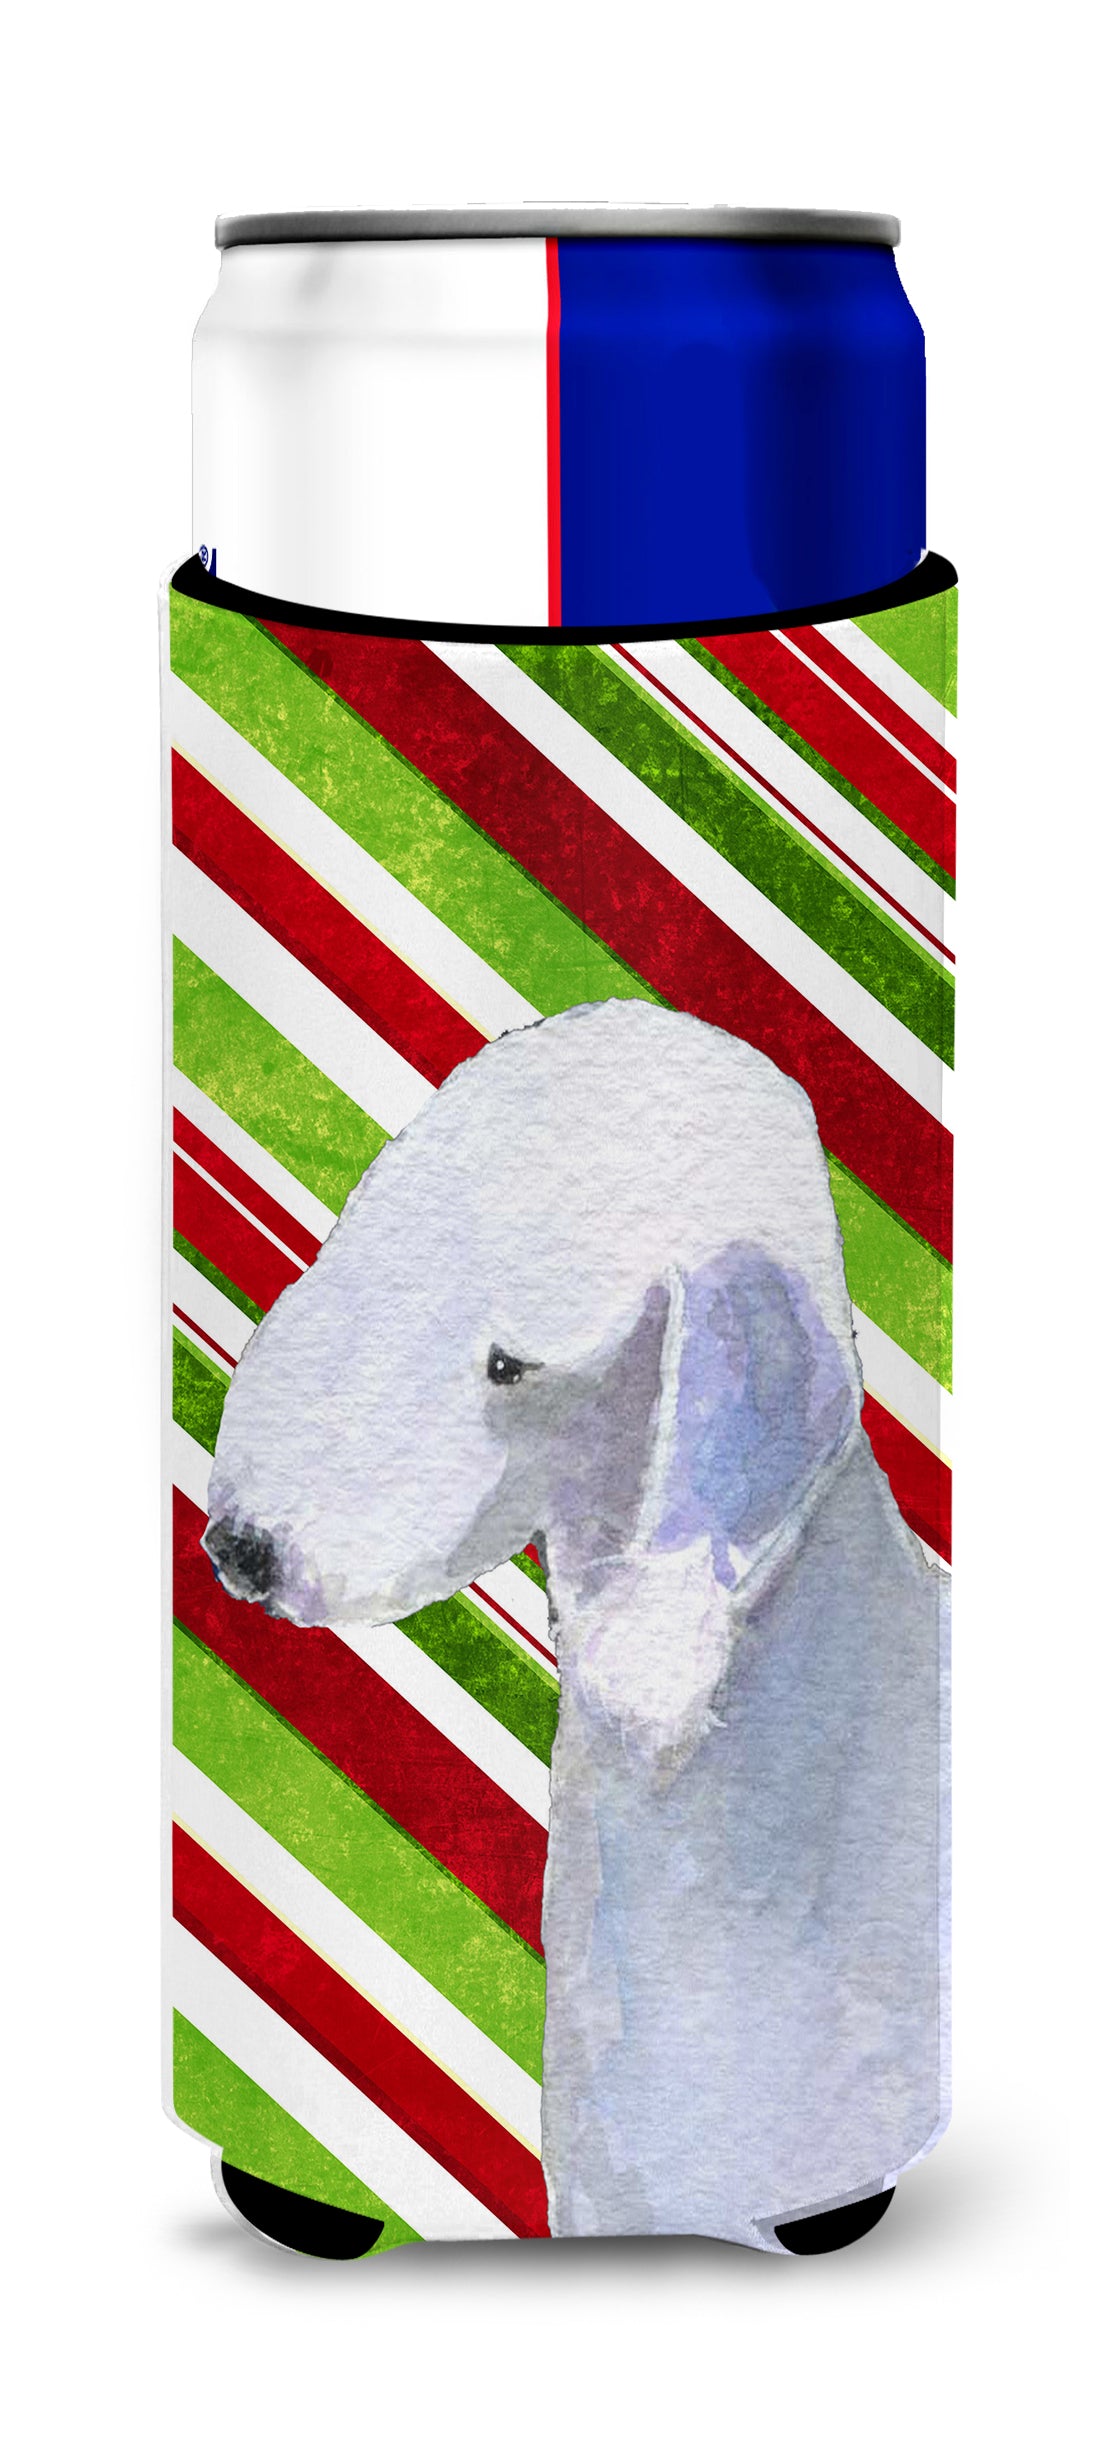 Bedlington Terrier Candy Cane Holiday Christmas Ultra Beverage Insulators for slim cans SS4552MUK